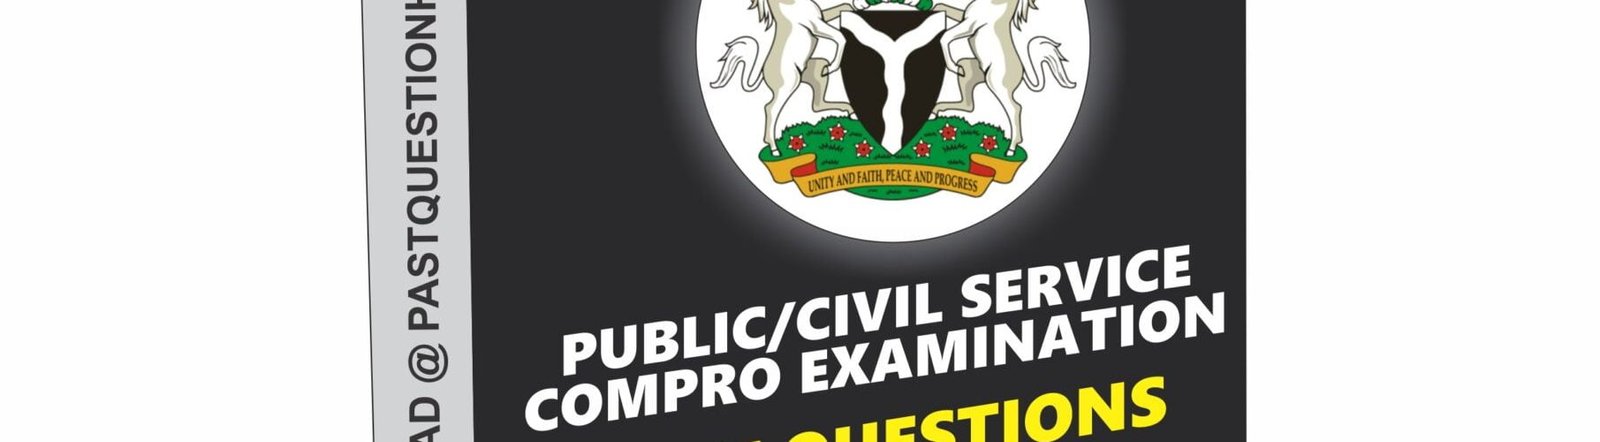 civil service past questions and answers